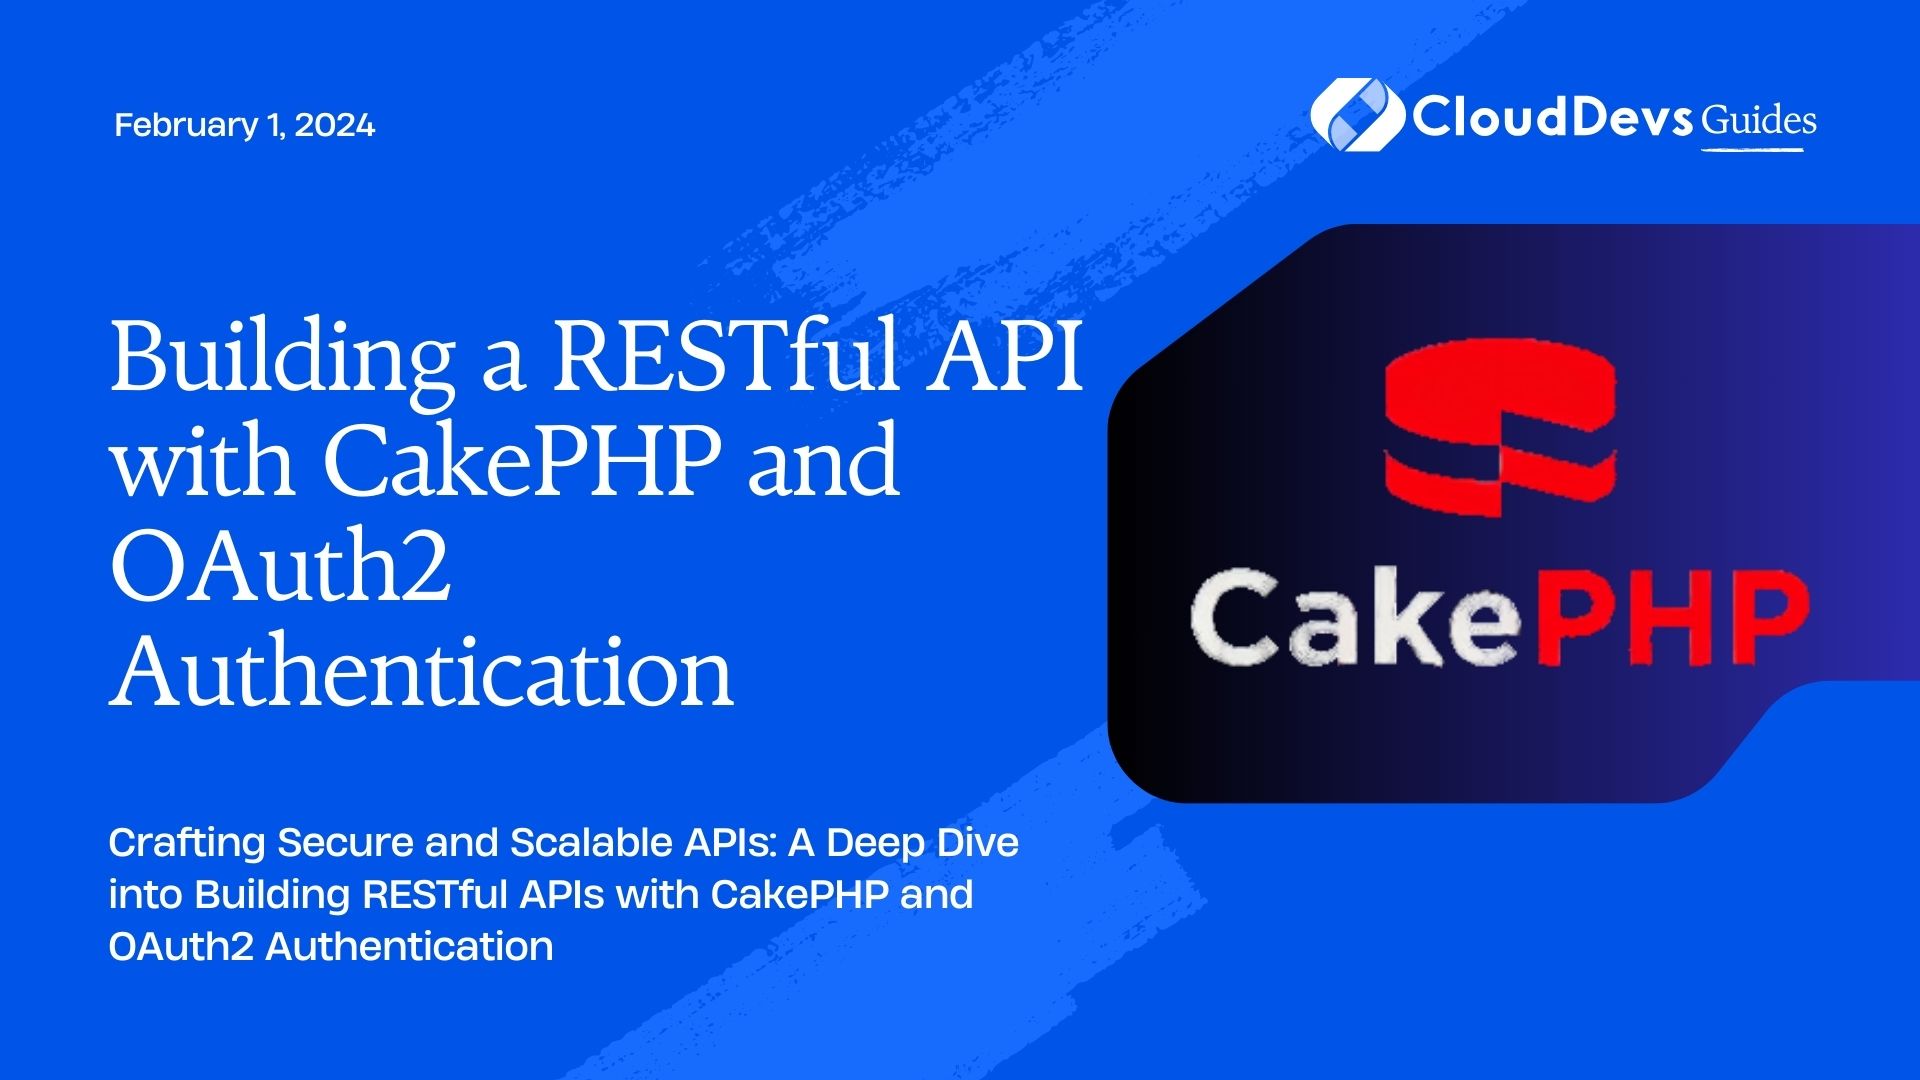 Building a RESTful API with CakePHP and OAuth2 Authentication